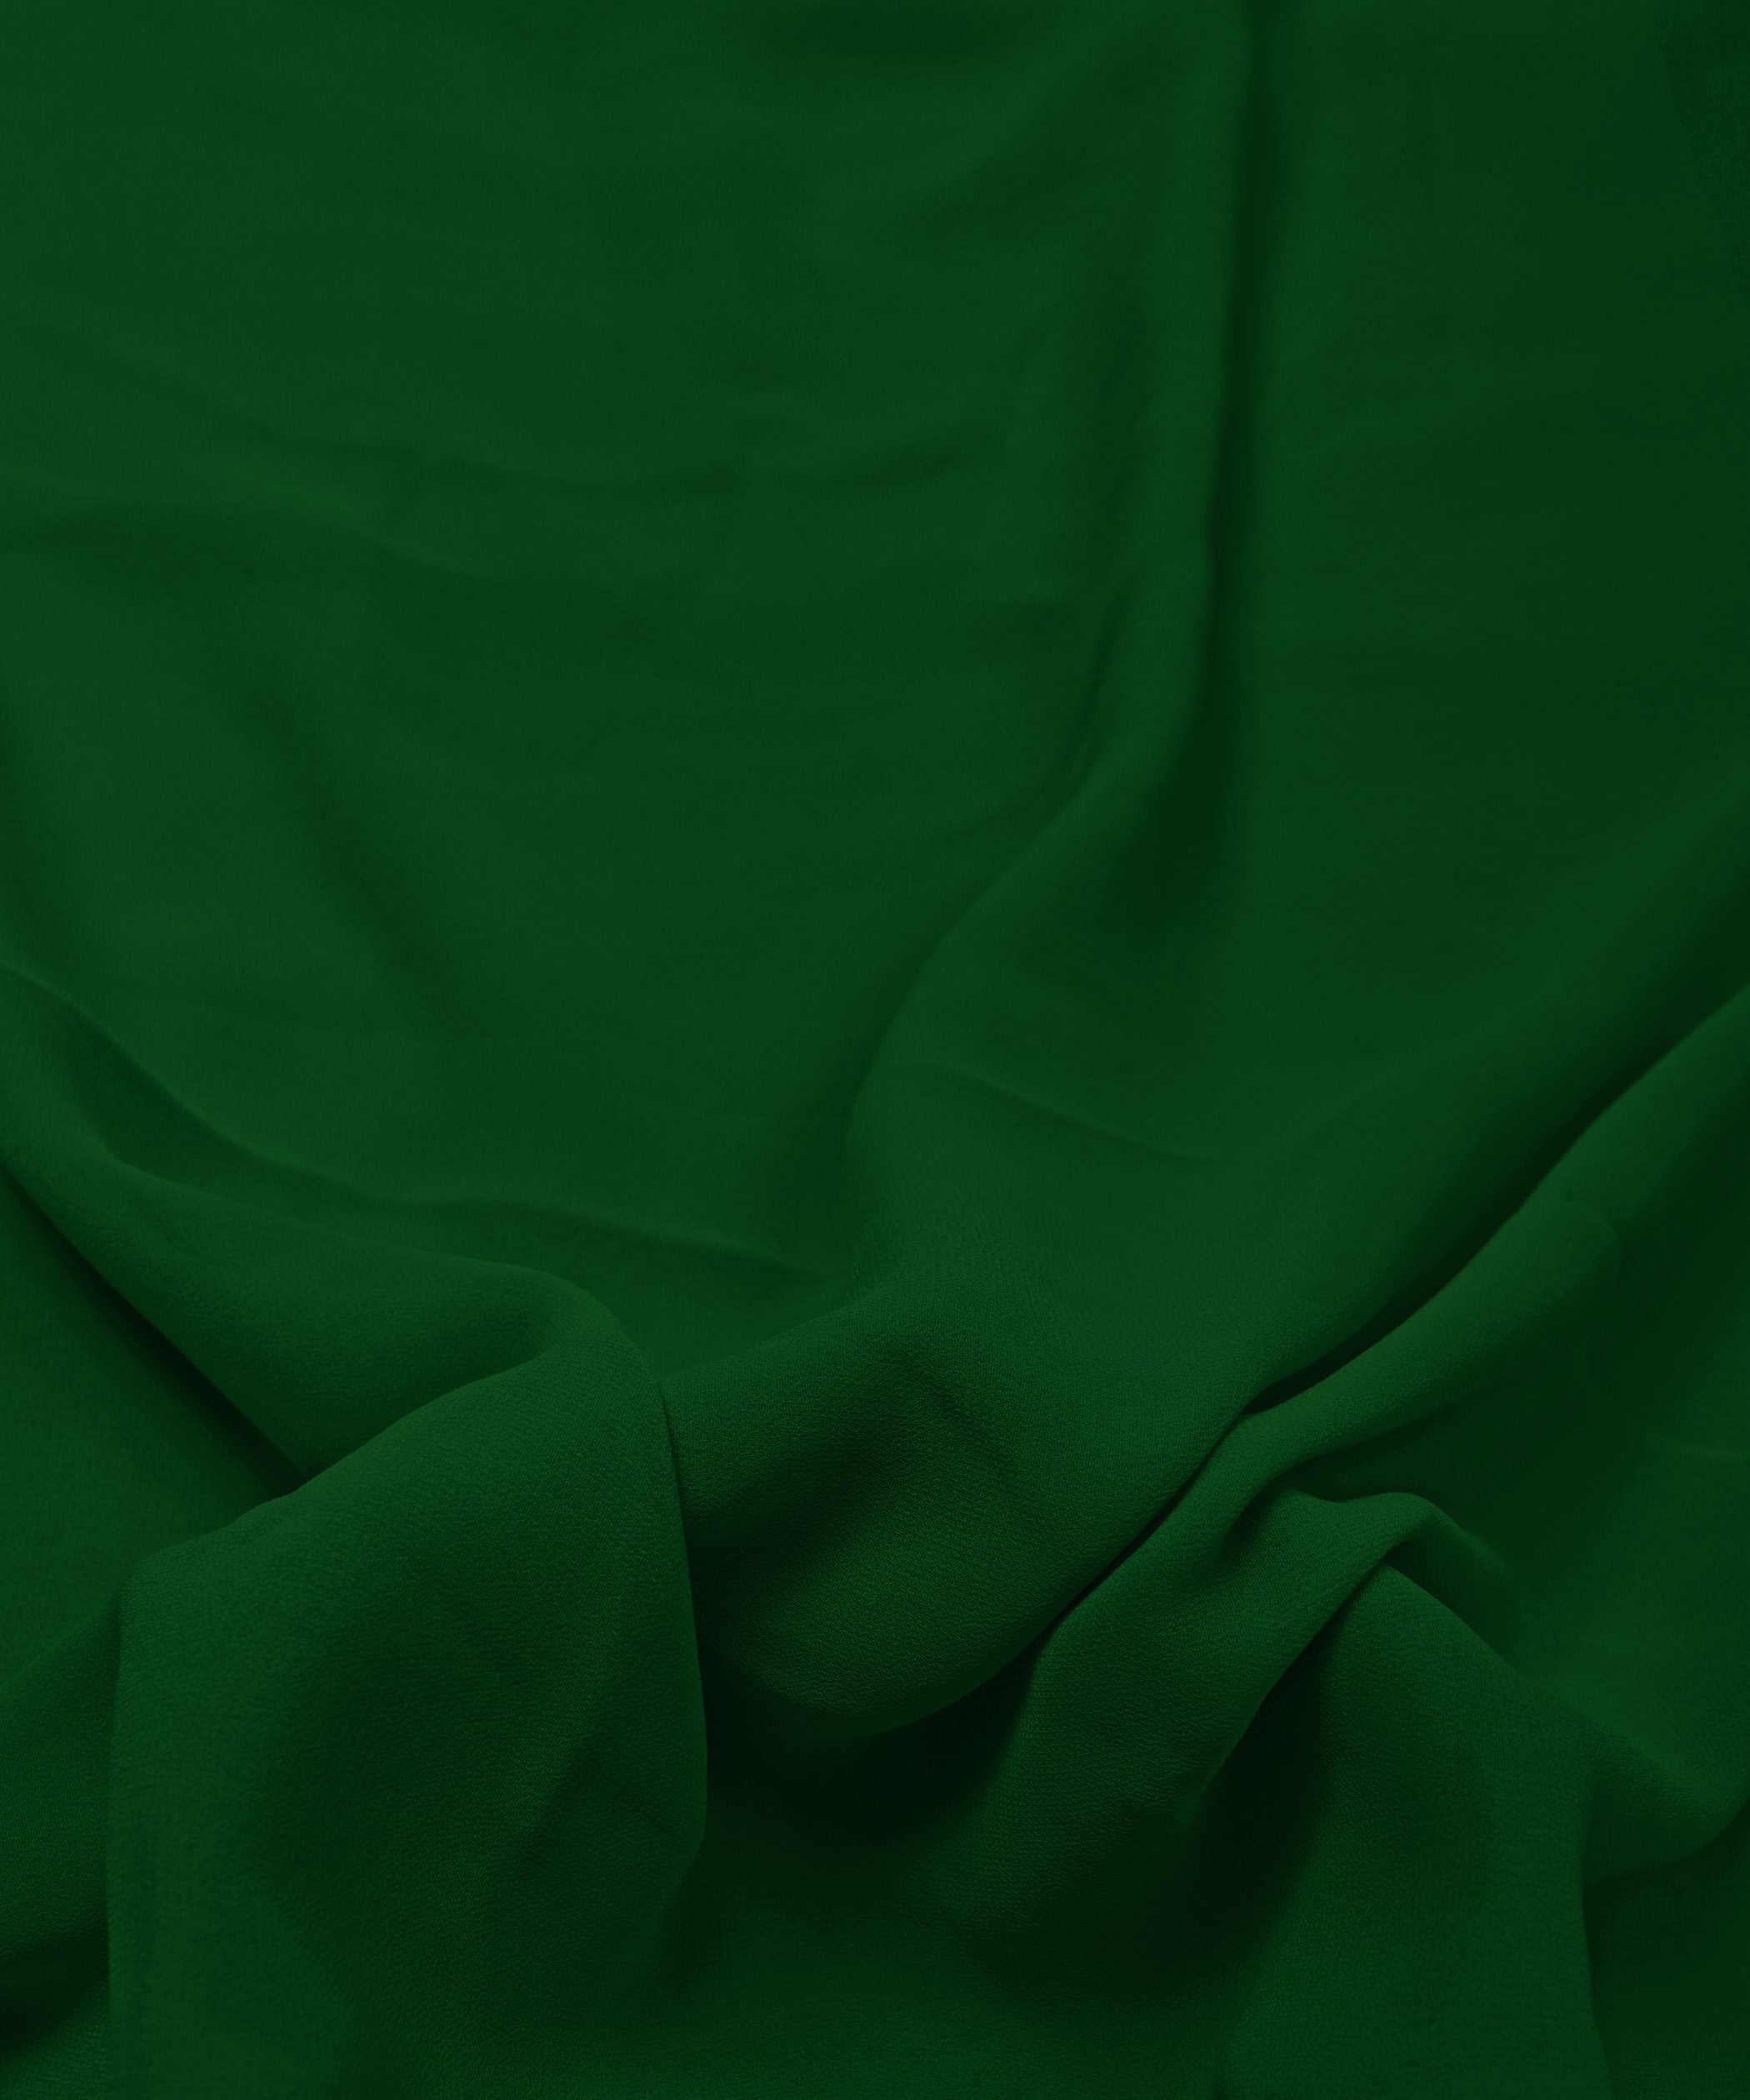 Cationic Dark Green Plain Dyed Georgette (60 Grams) Fabric